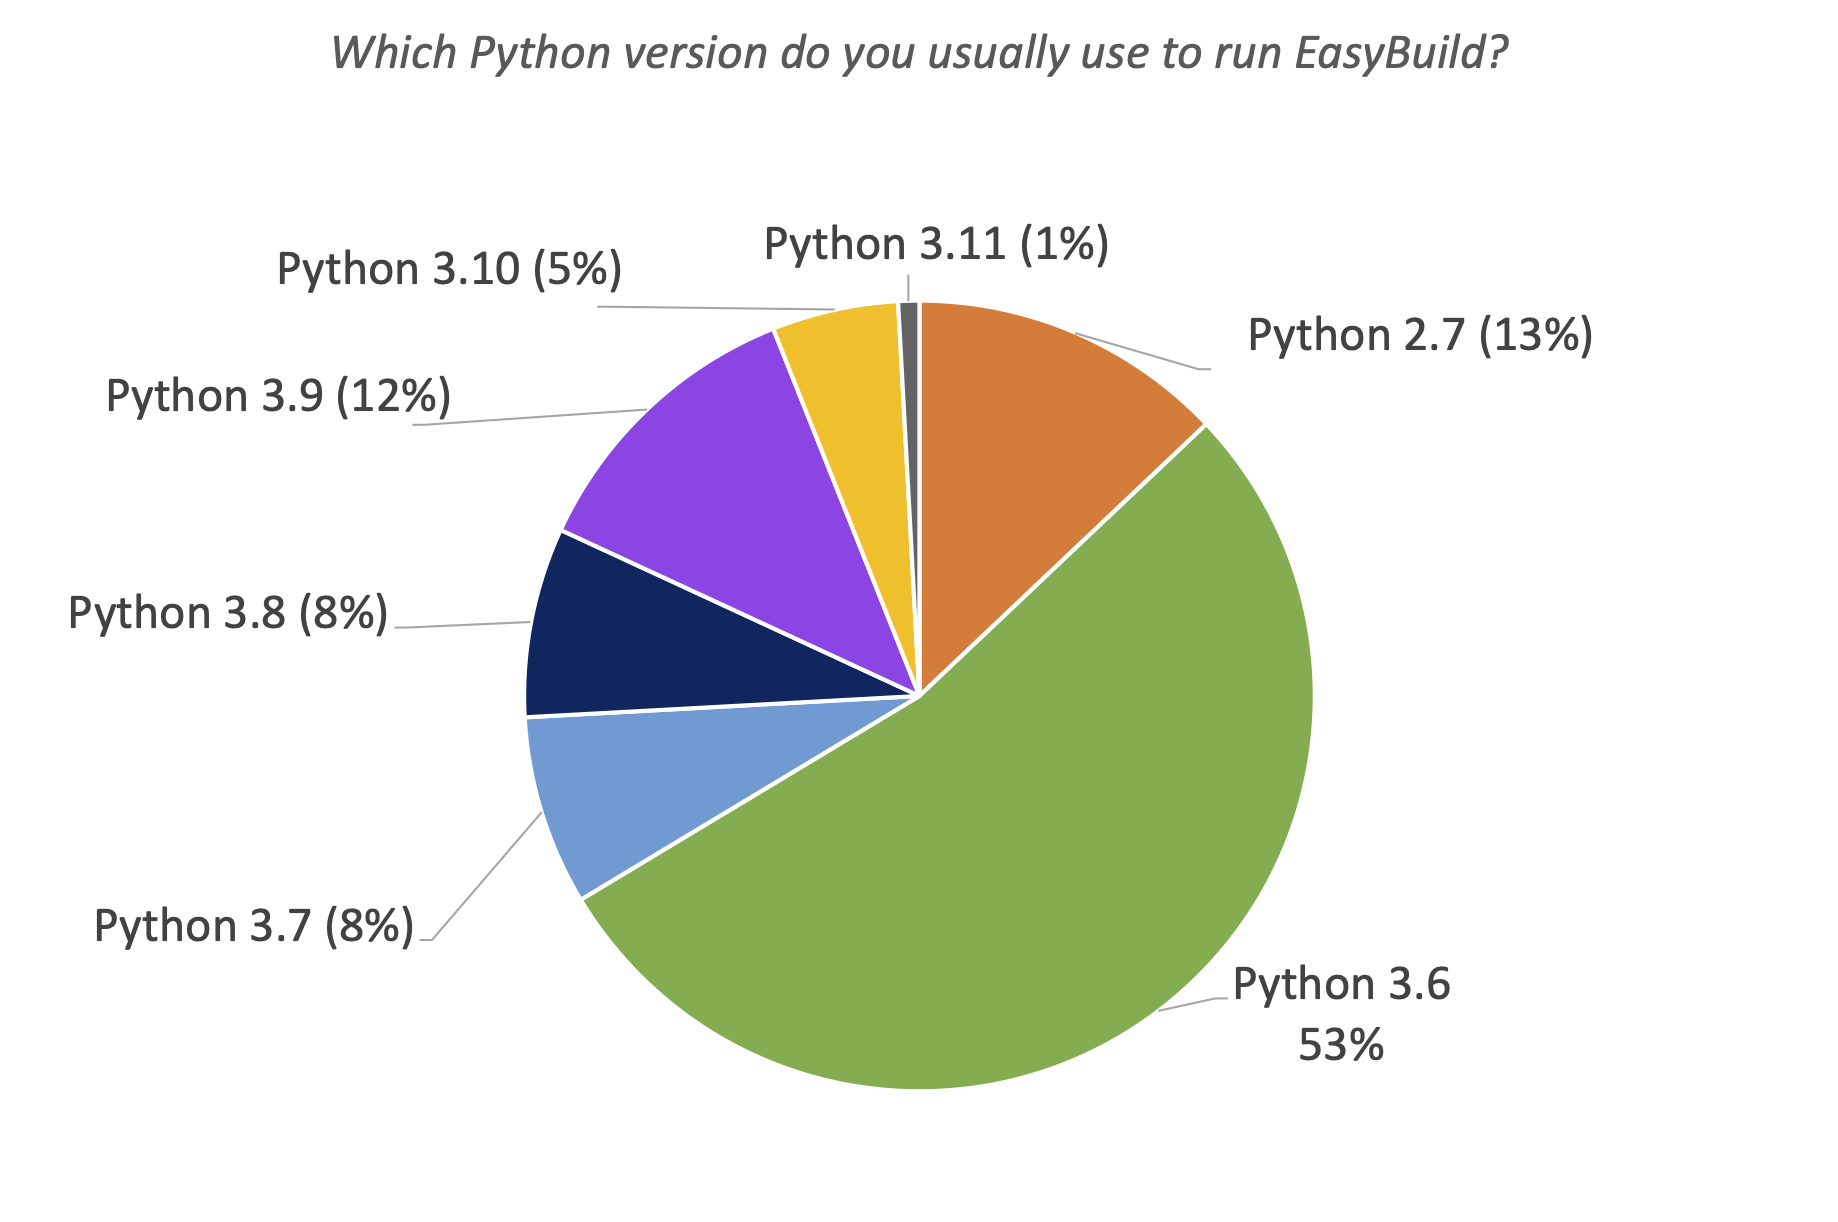 09. Which Python version do you usually use to run EasyBuild?